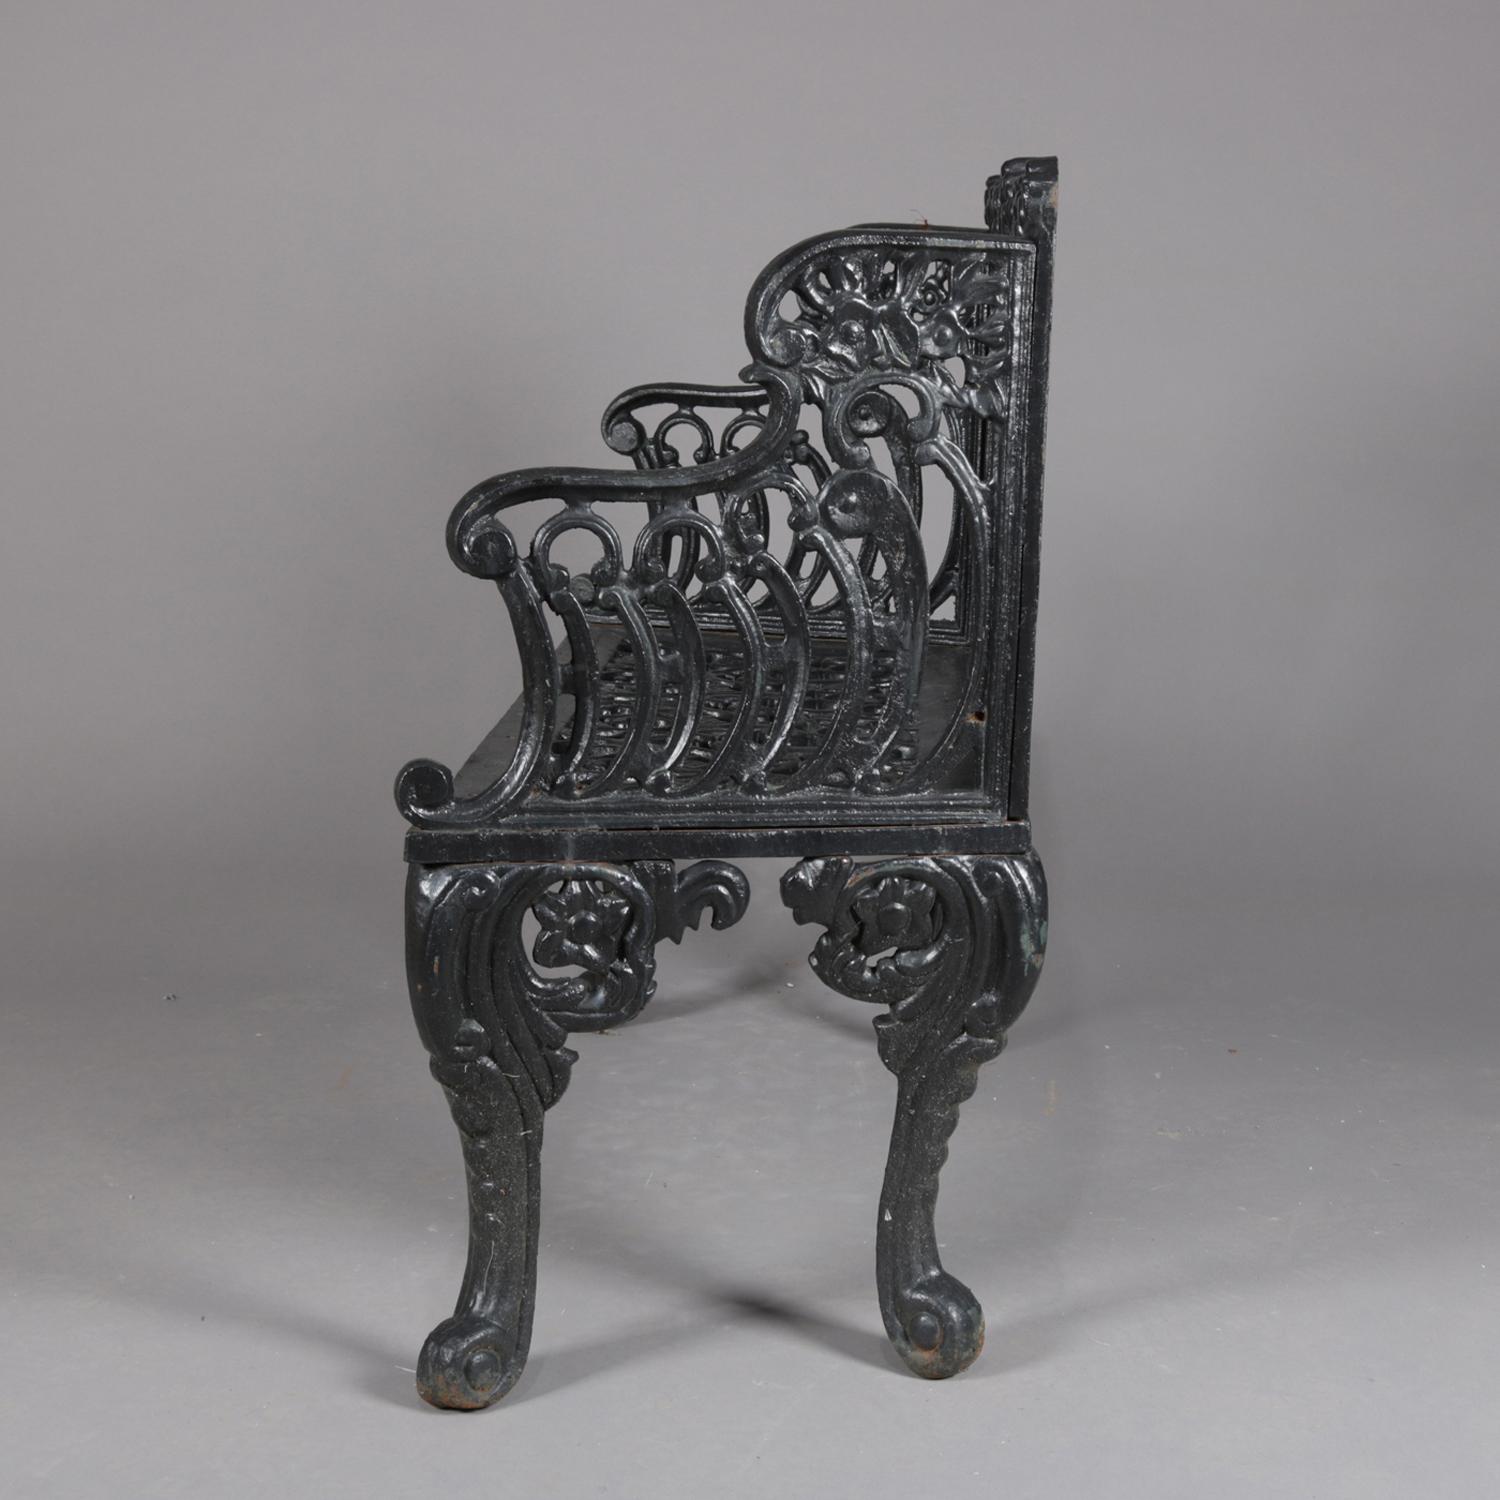 Rococo Revival Painted Cast Iron 